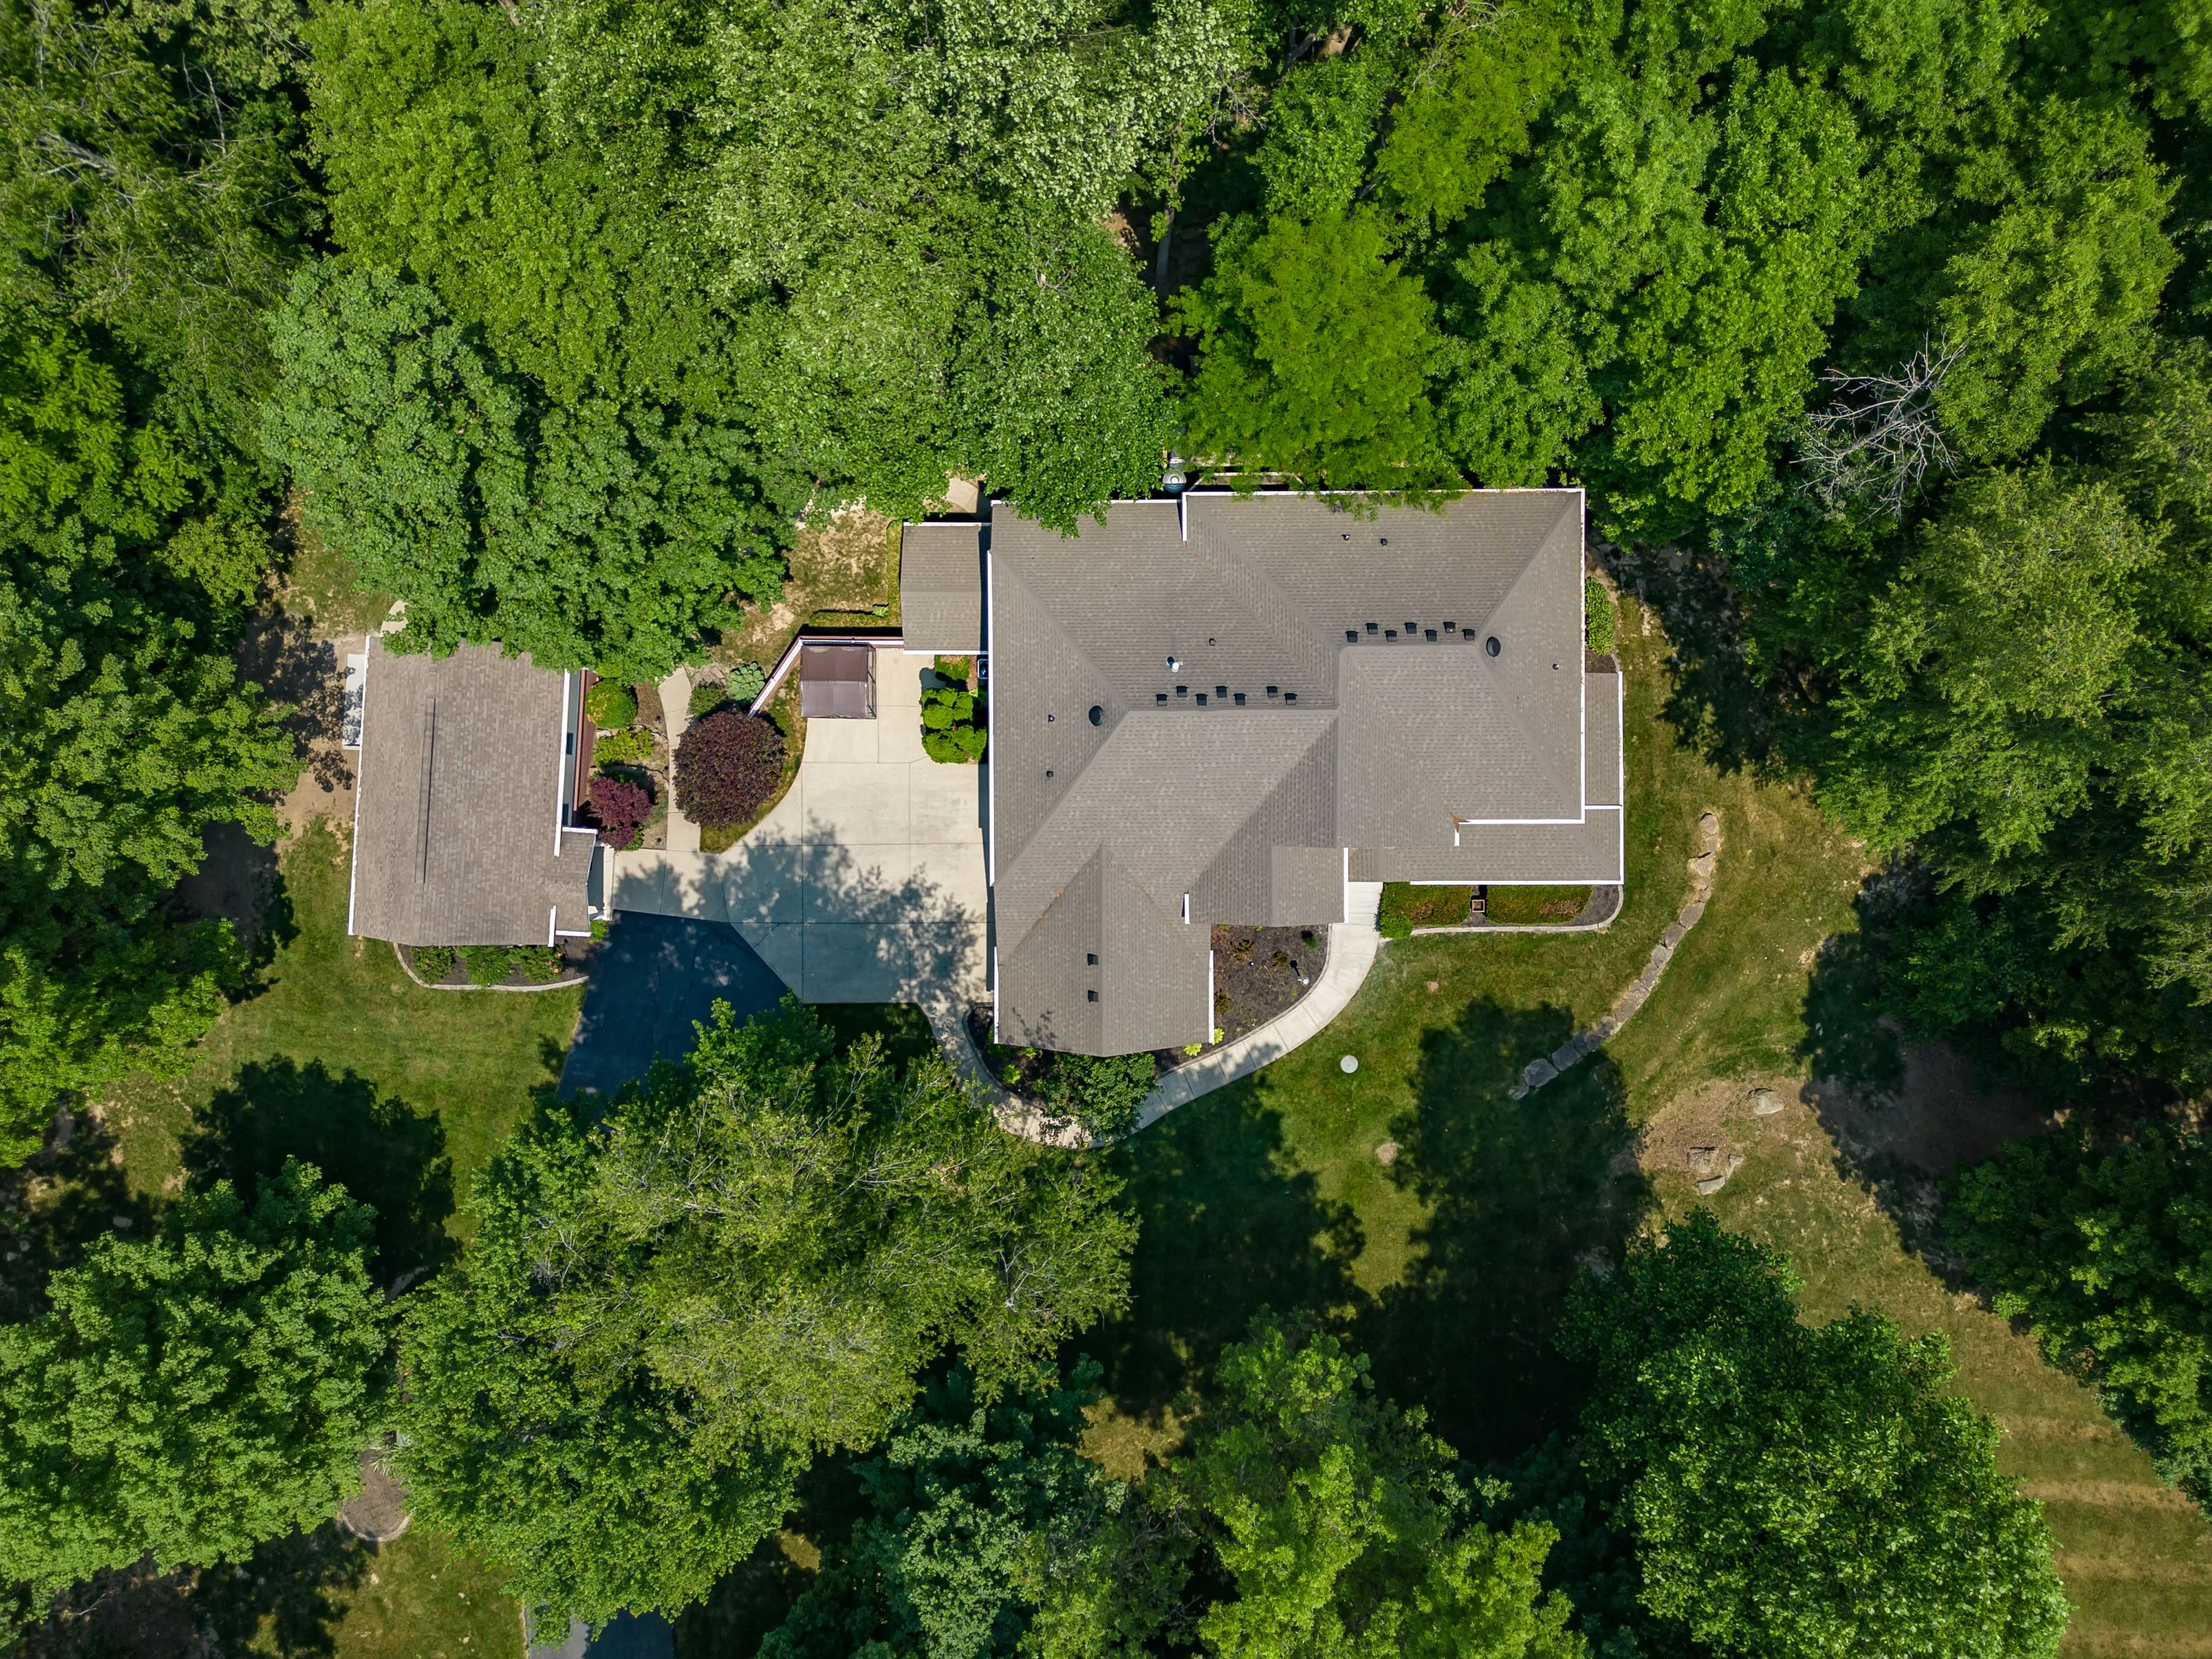 Aerial view of a large house with multiple roofs surrounded by dense green trees.